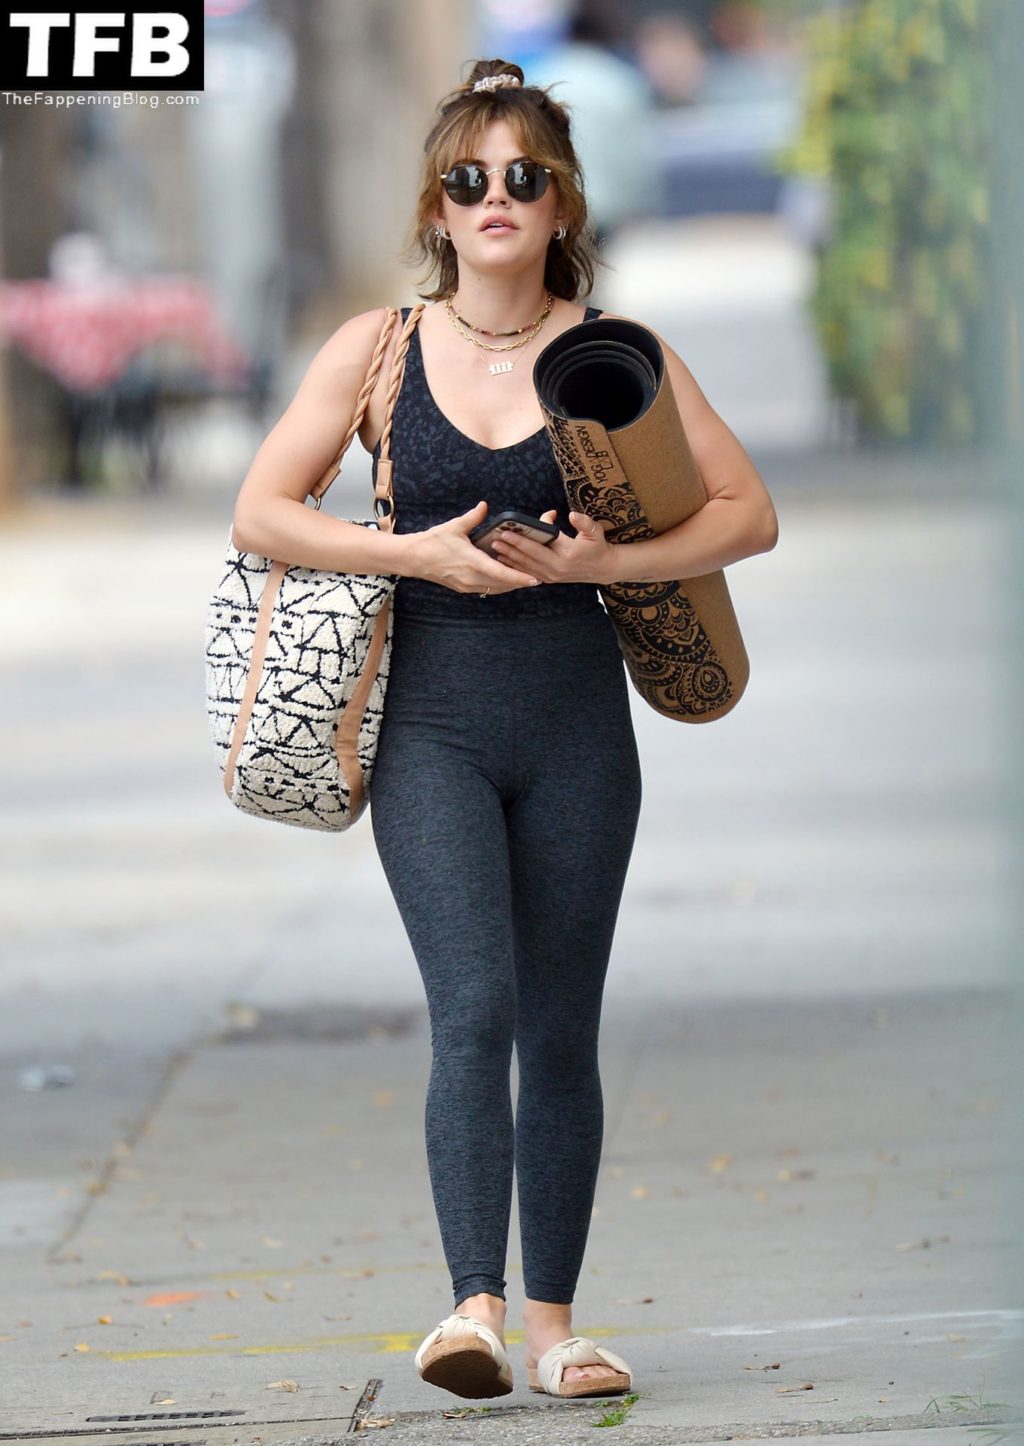 Lucy Hale Sexy Fappening Blog 10 1024x1446 - Lucy Hale Takes a Hot Yoga Class in LA (50 Photos)